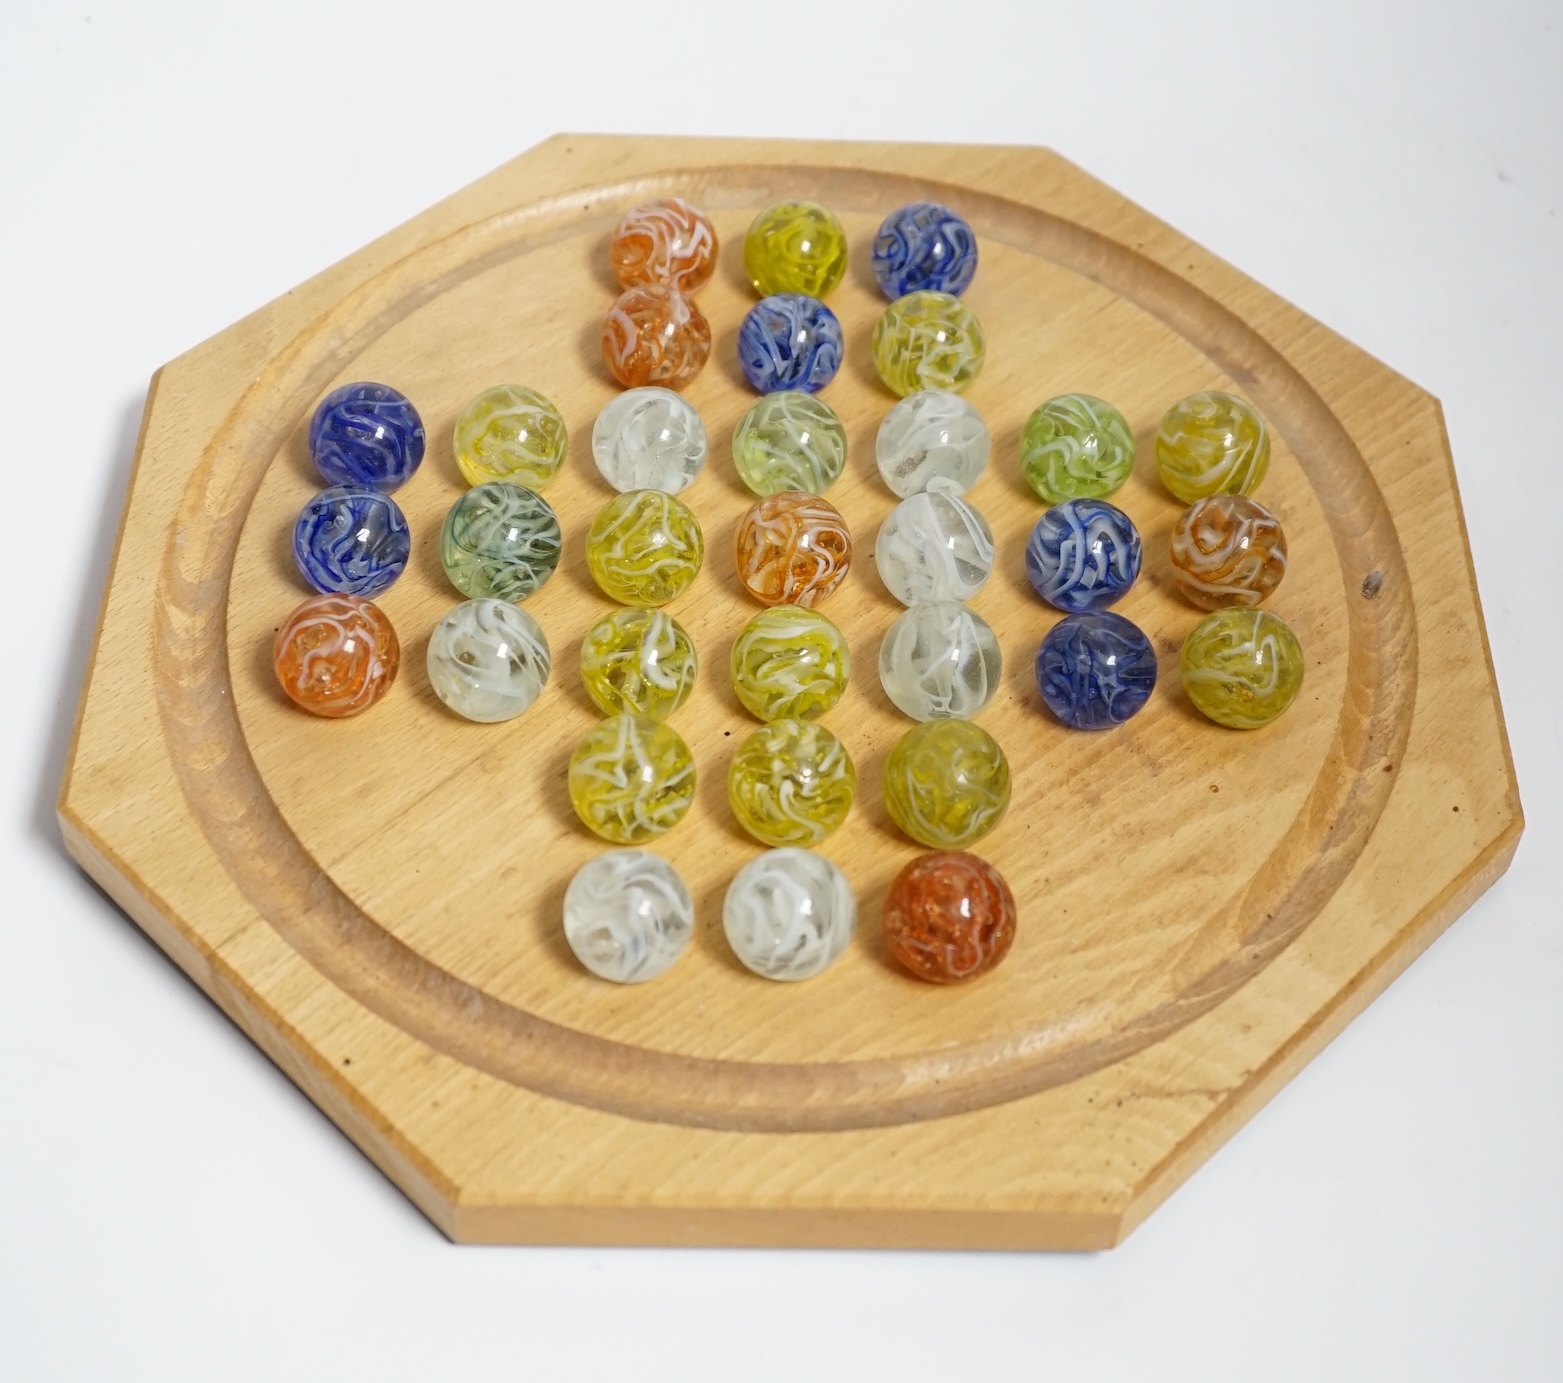 A turned wood solitaire board with multi-coloured glass marbles, 27cm wide                                                                                                                                                  